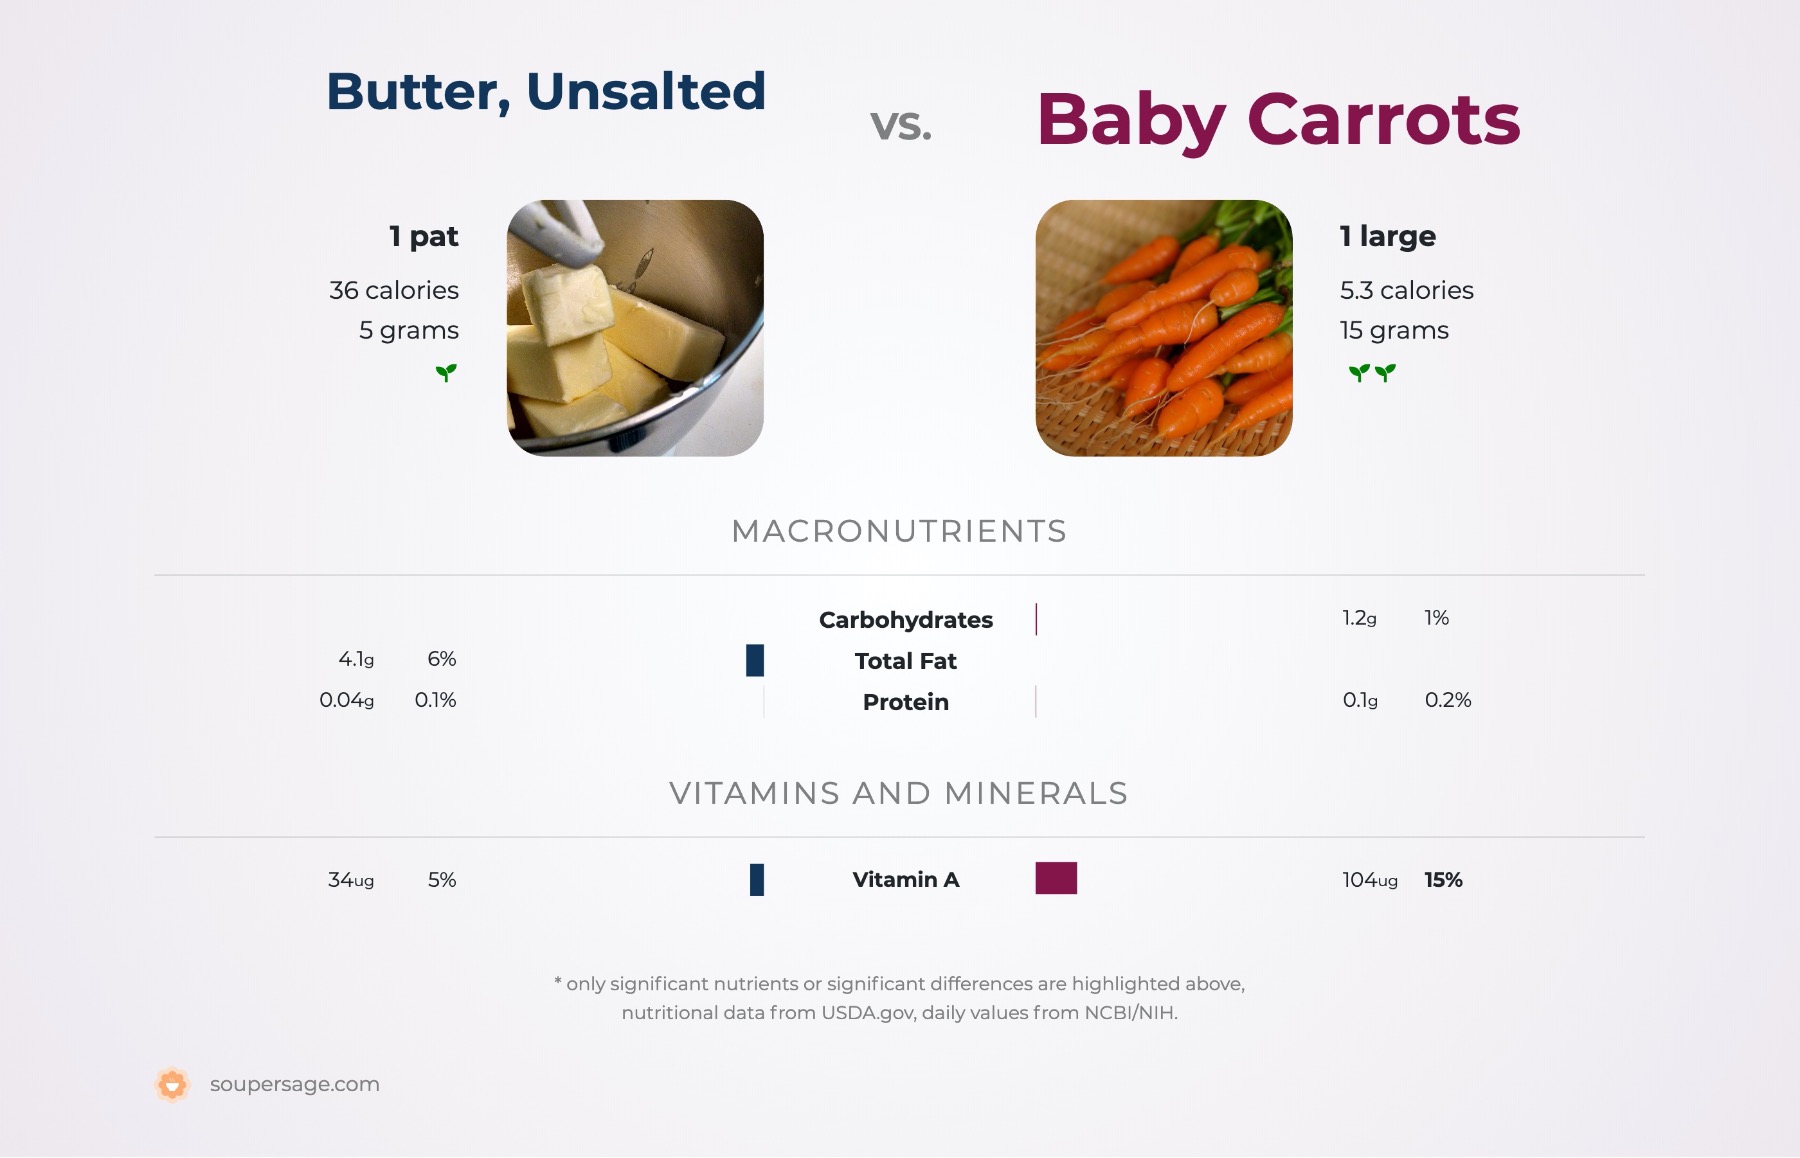 nutrition comparison of butter, unsalted vs. baby carrots